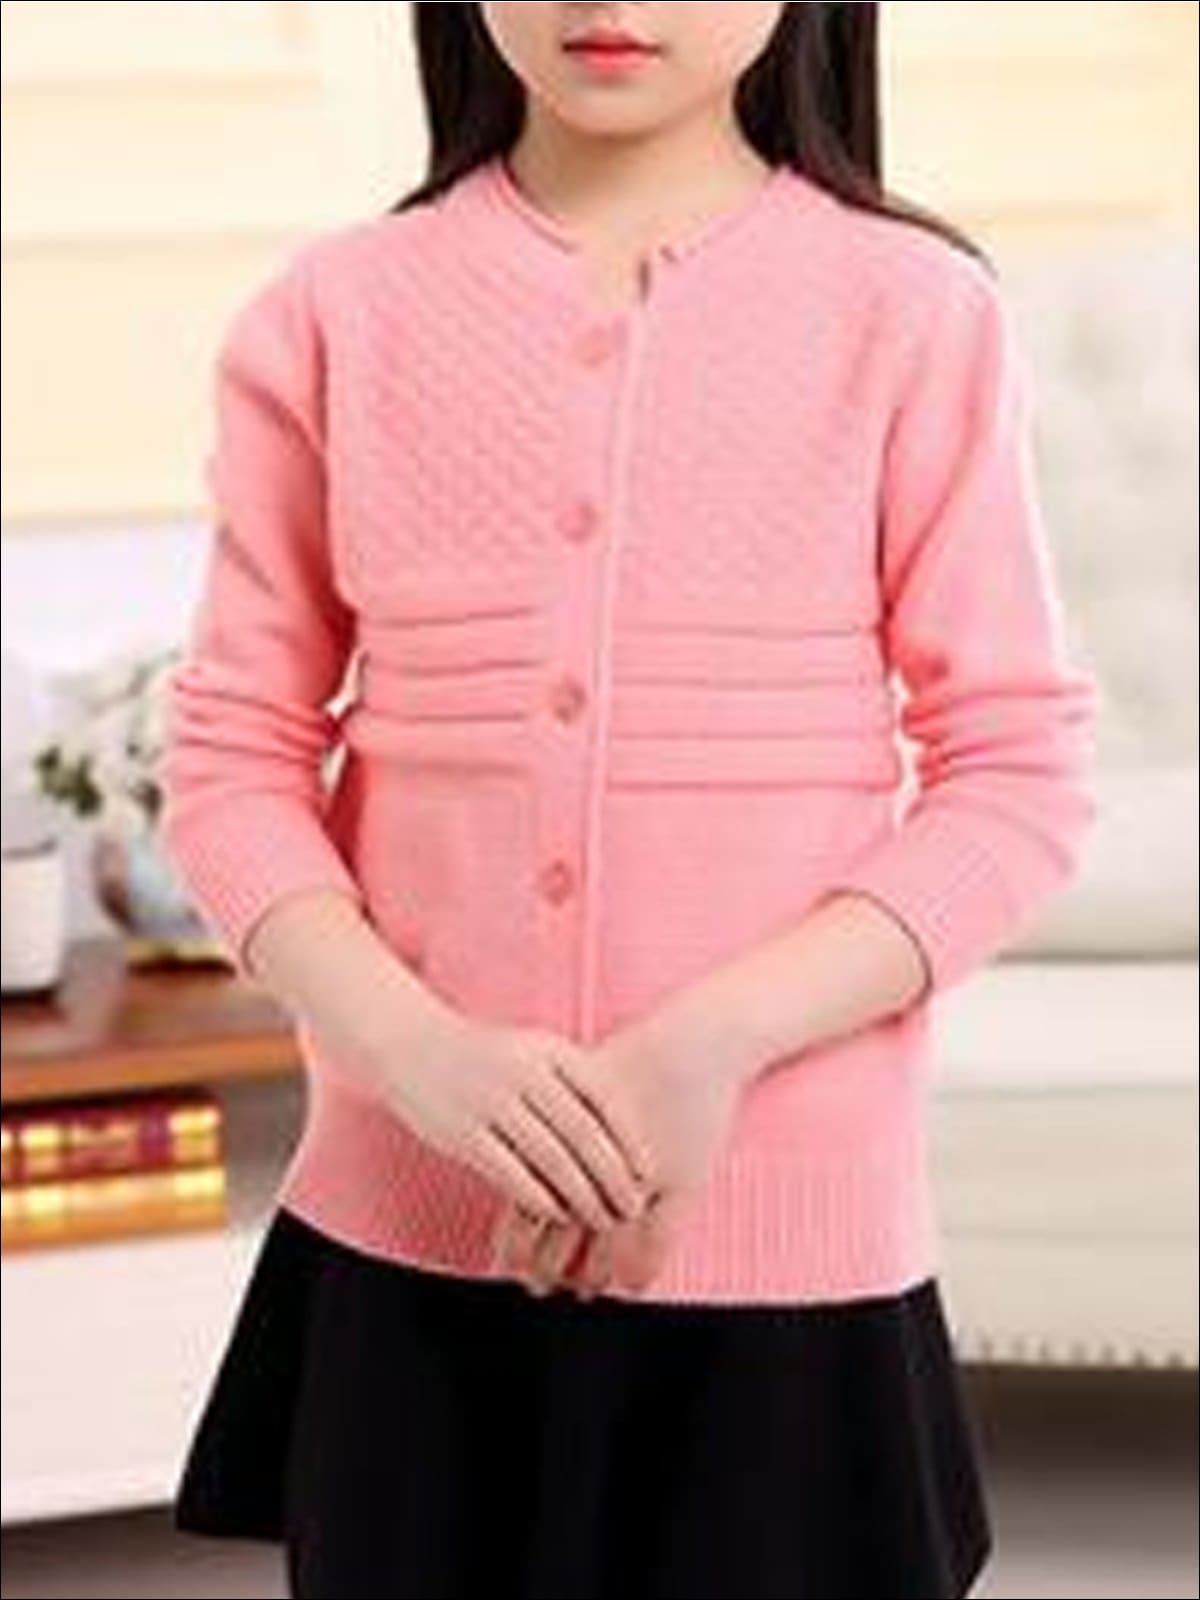 Girls Cozy Knitted Button Up Cardigan - Pink / 4T - Girls Sweater